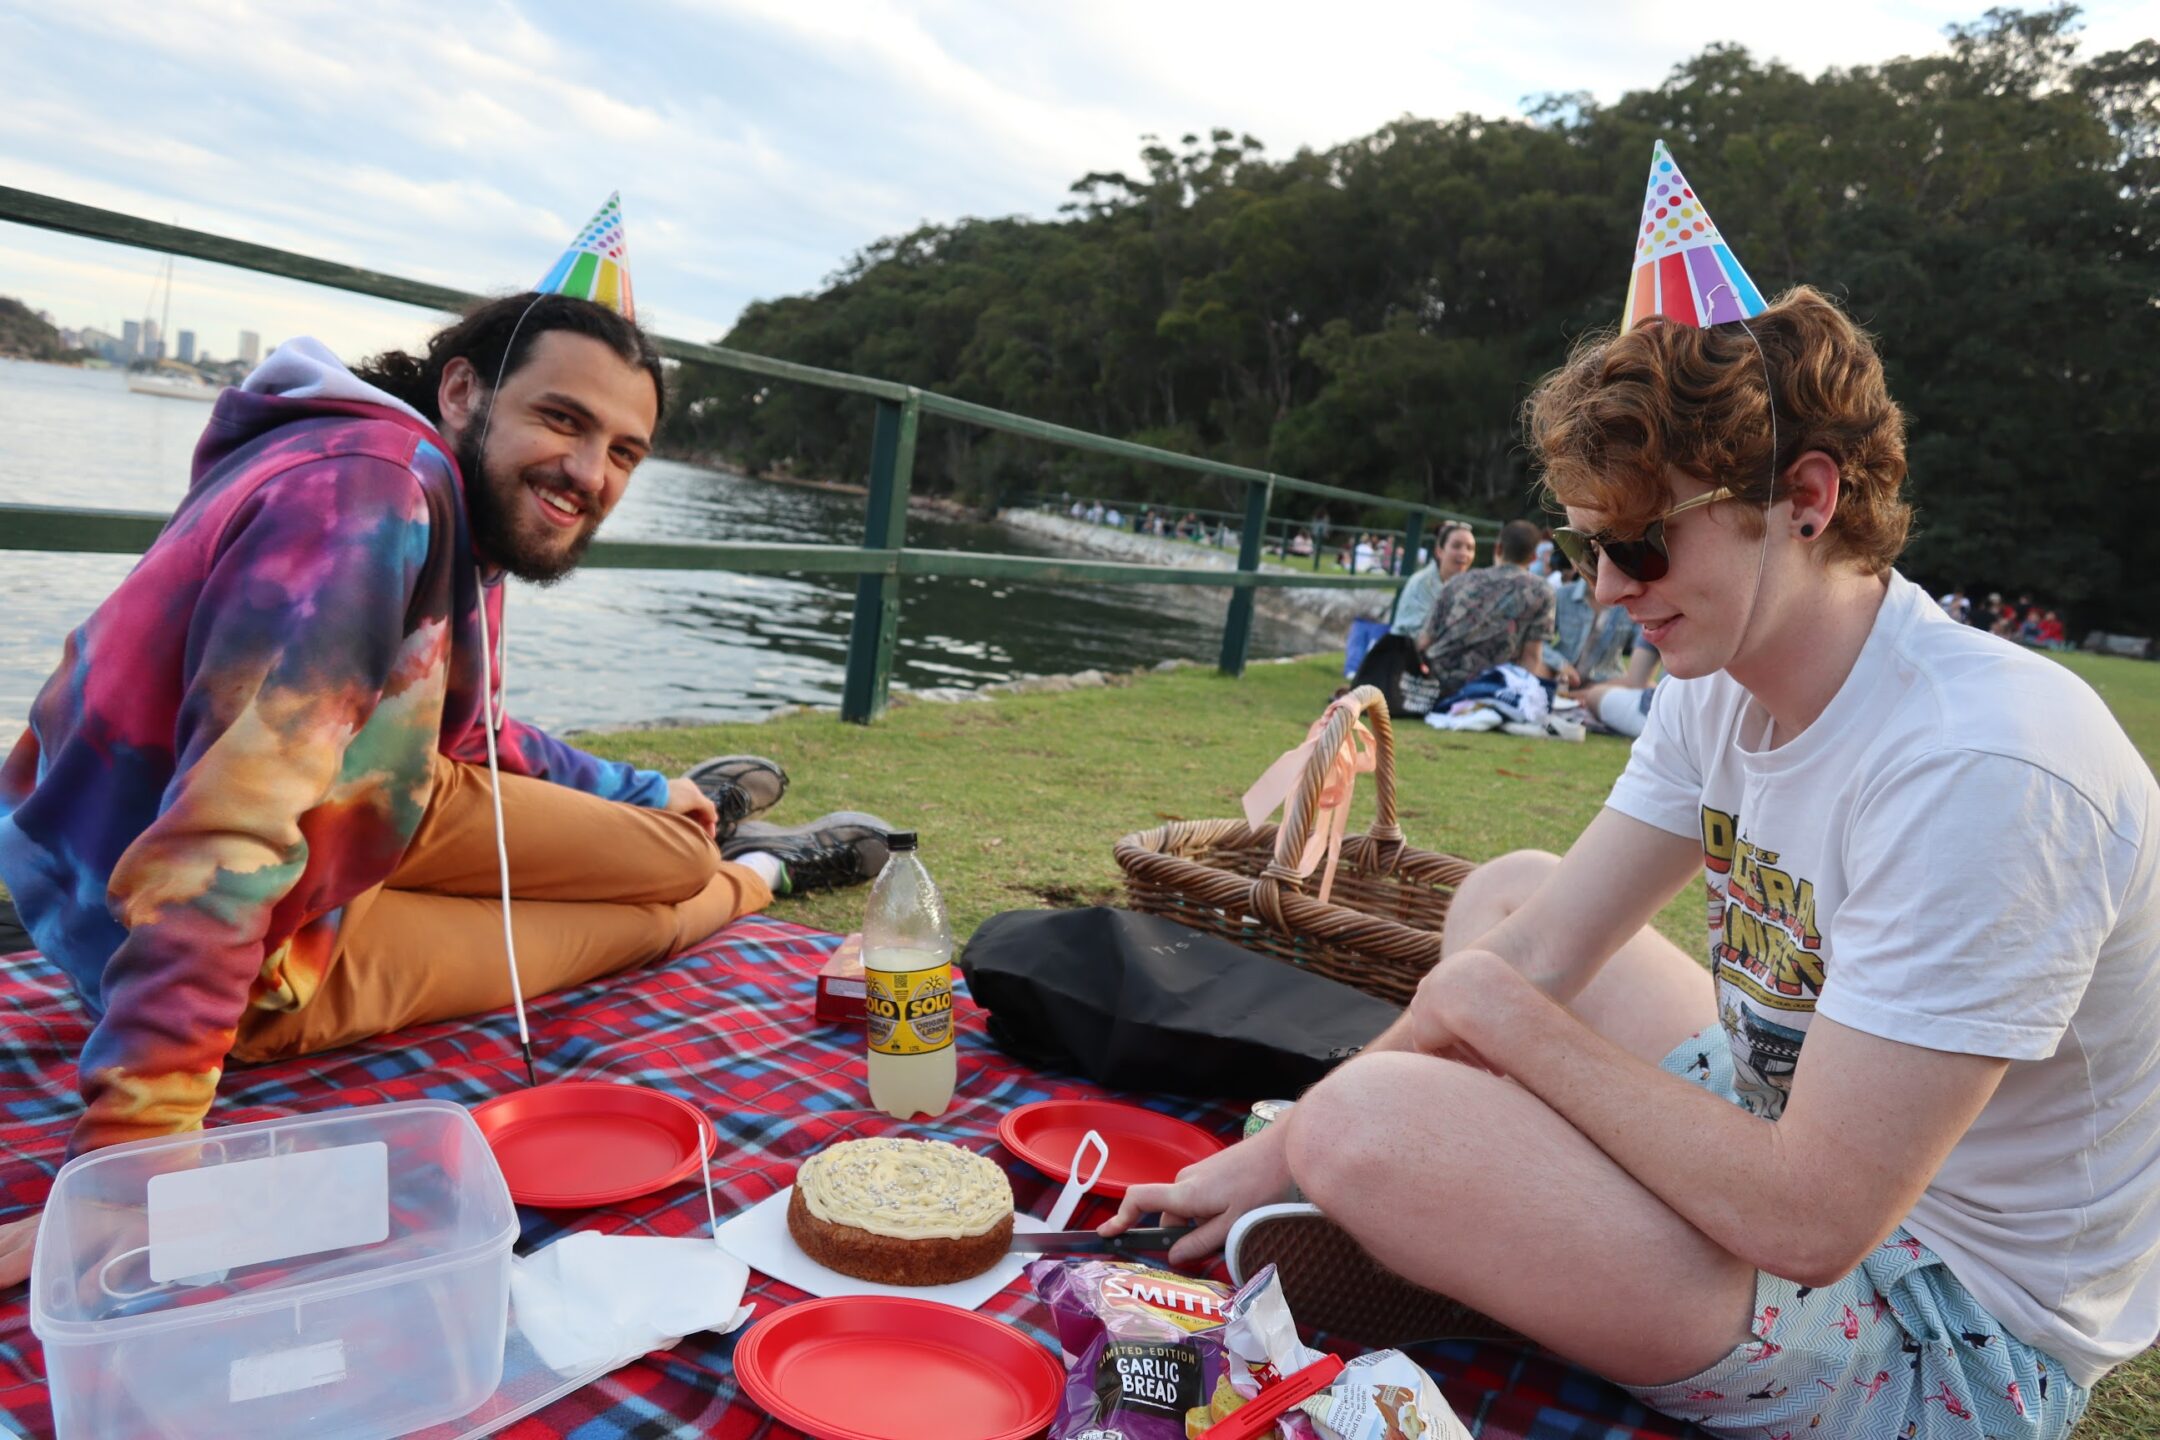 Two people in colourful party hats sitting on a picnic rug eating food